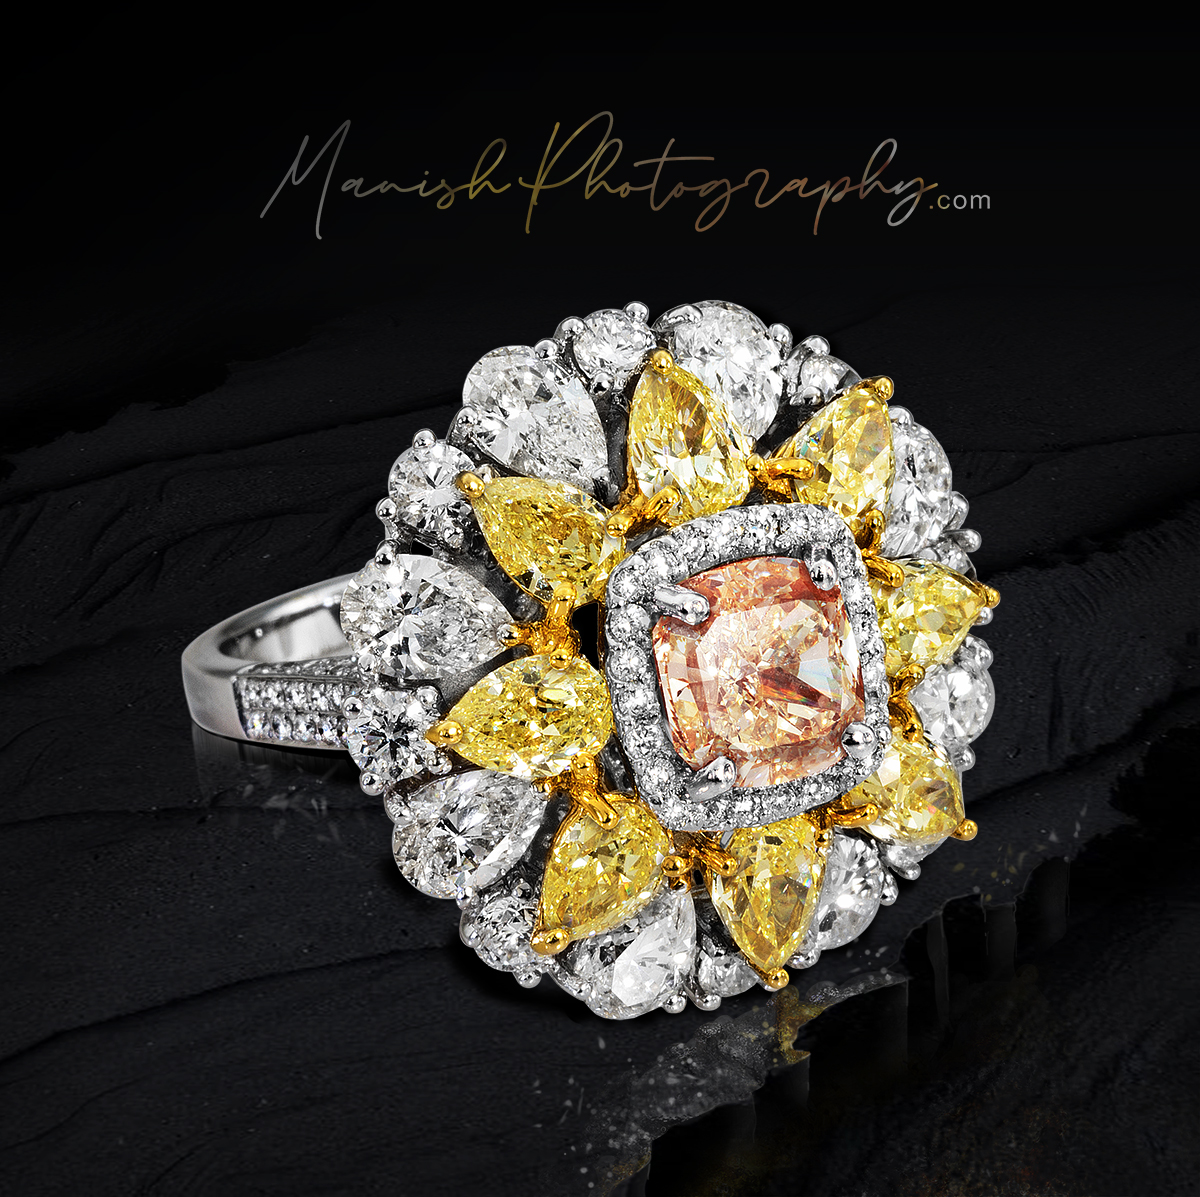 white and yellow diamond studded ring jewellery mood shot by manish photography